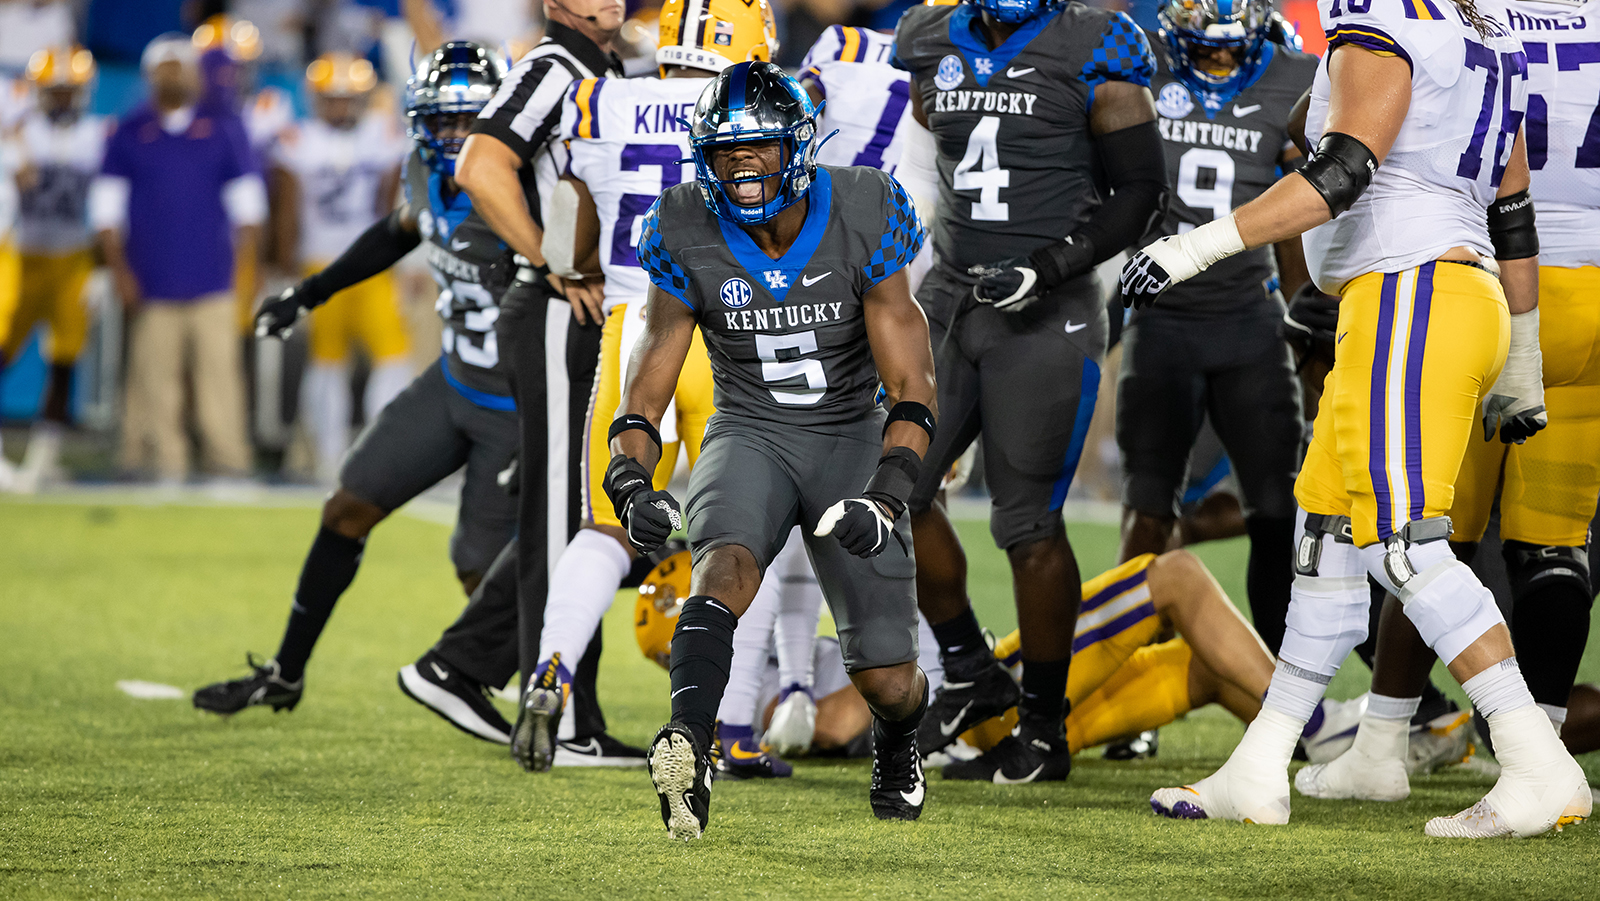 Stoops, Cats Ready to Move Forward